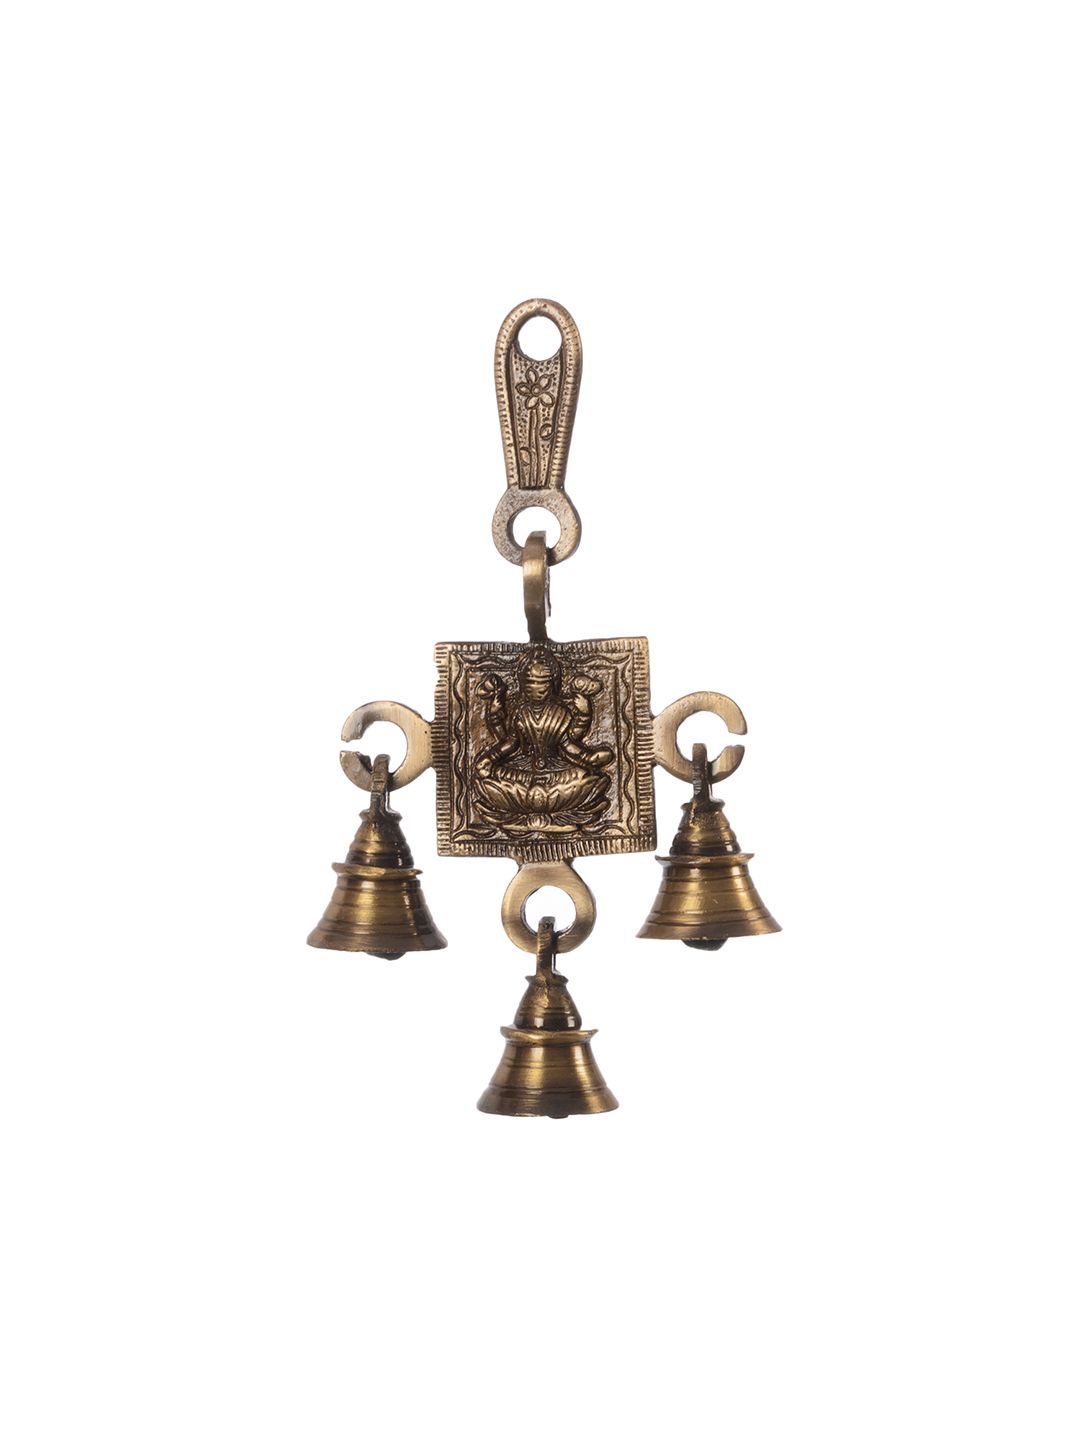 eCraftIndia Gold-Toned Brass Lord Laxmi Wall Hanging Bells Price in India